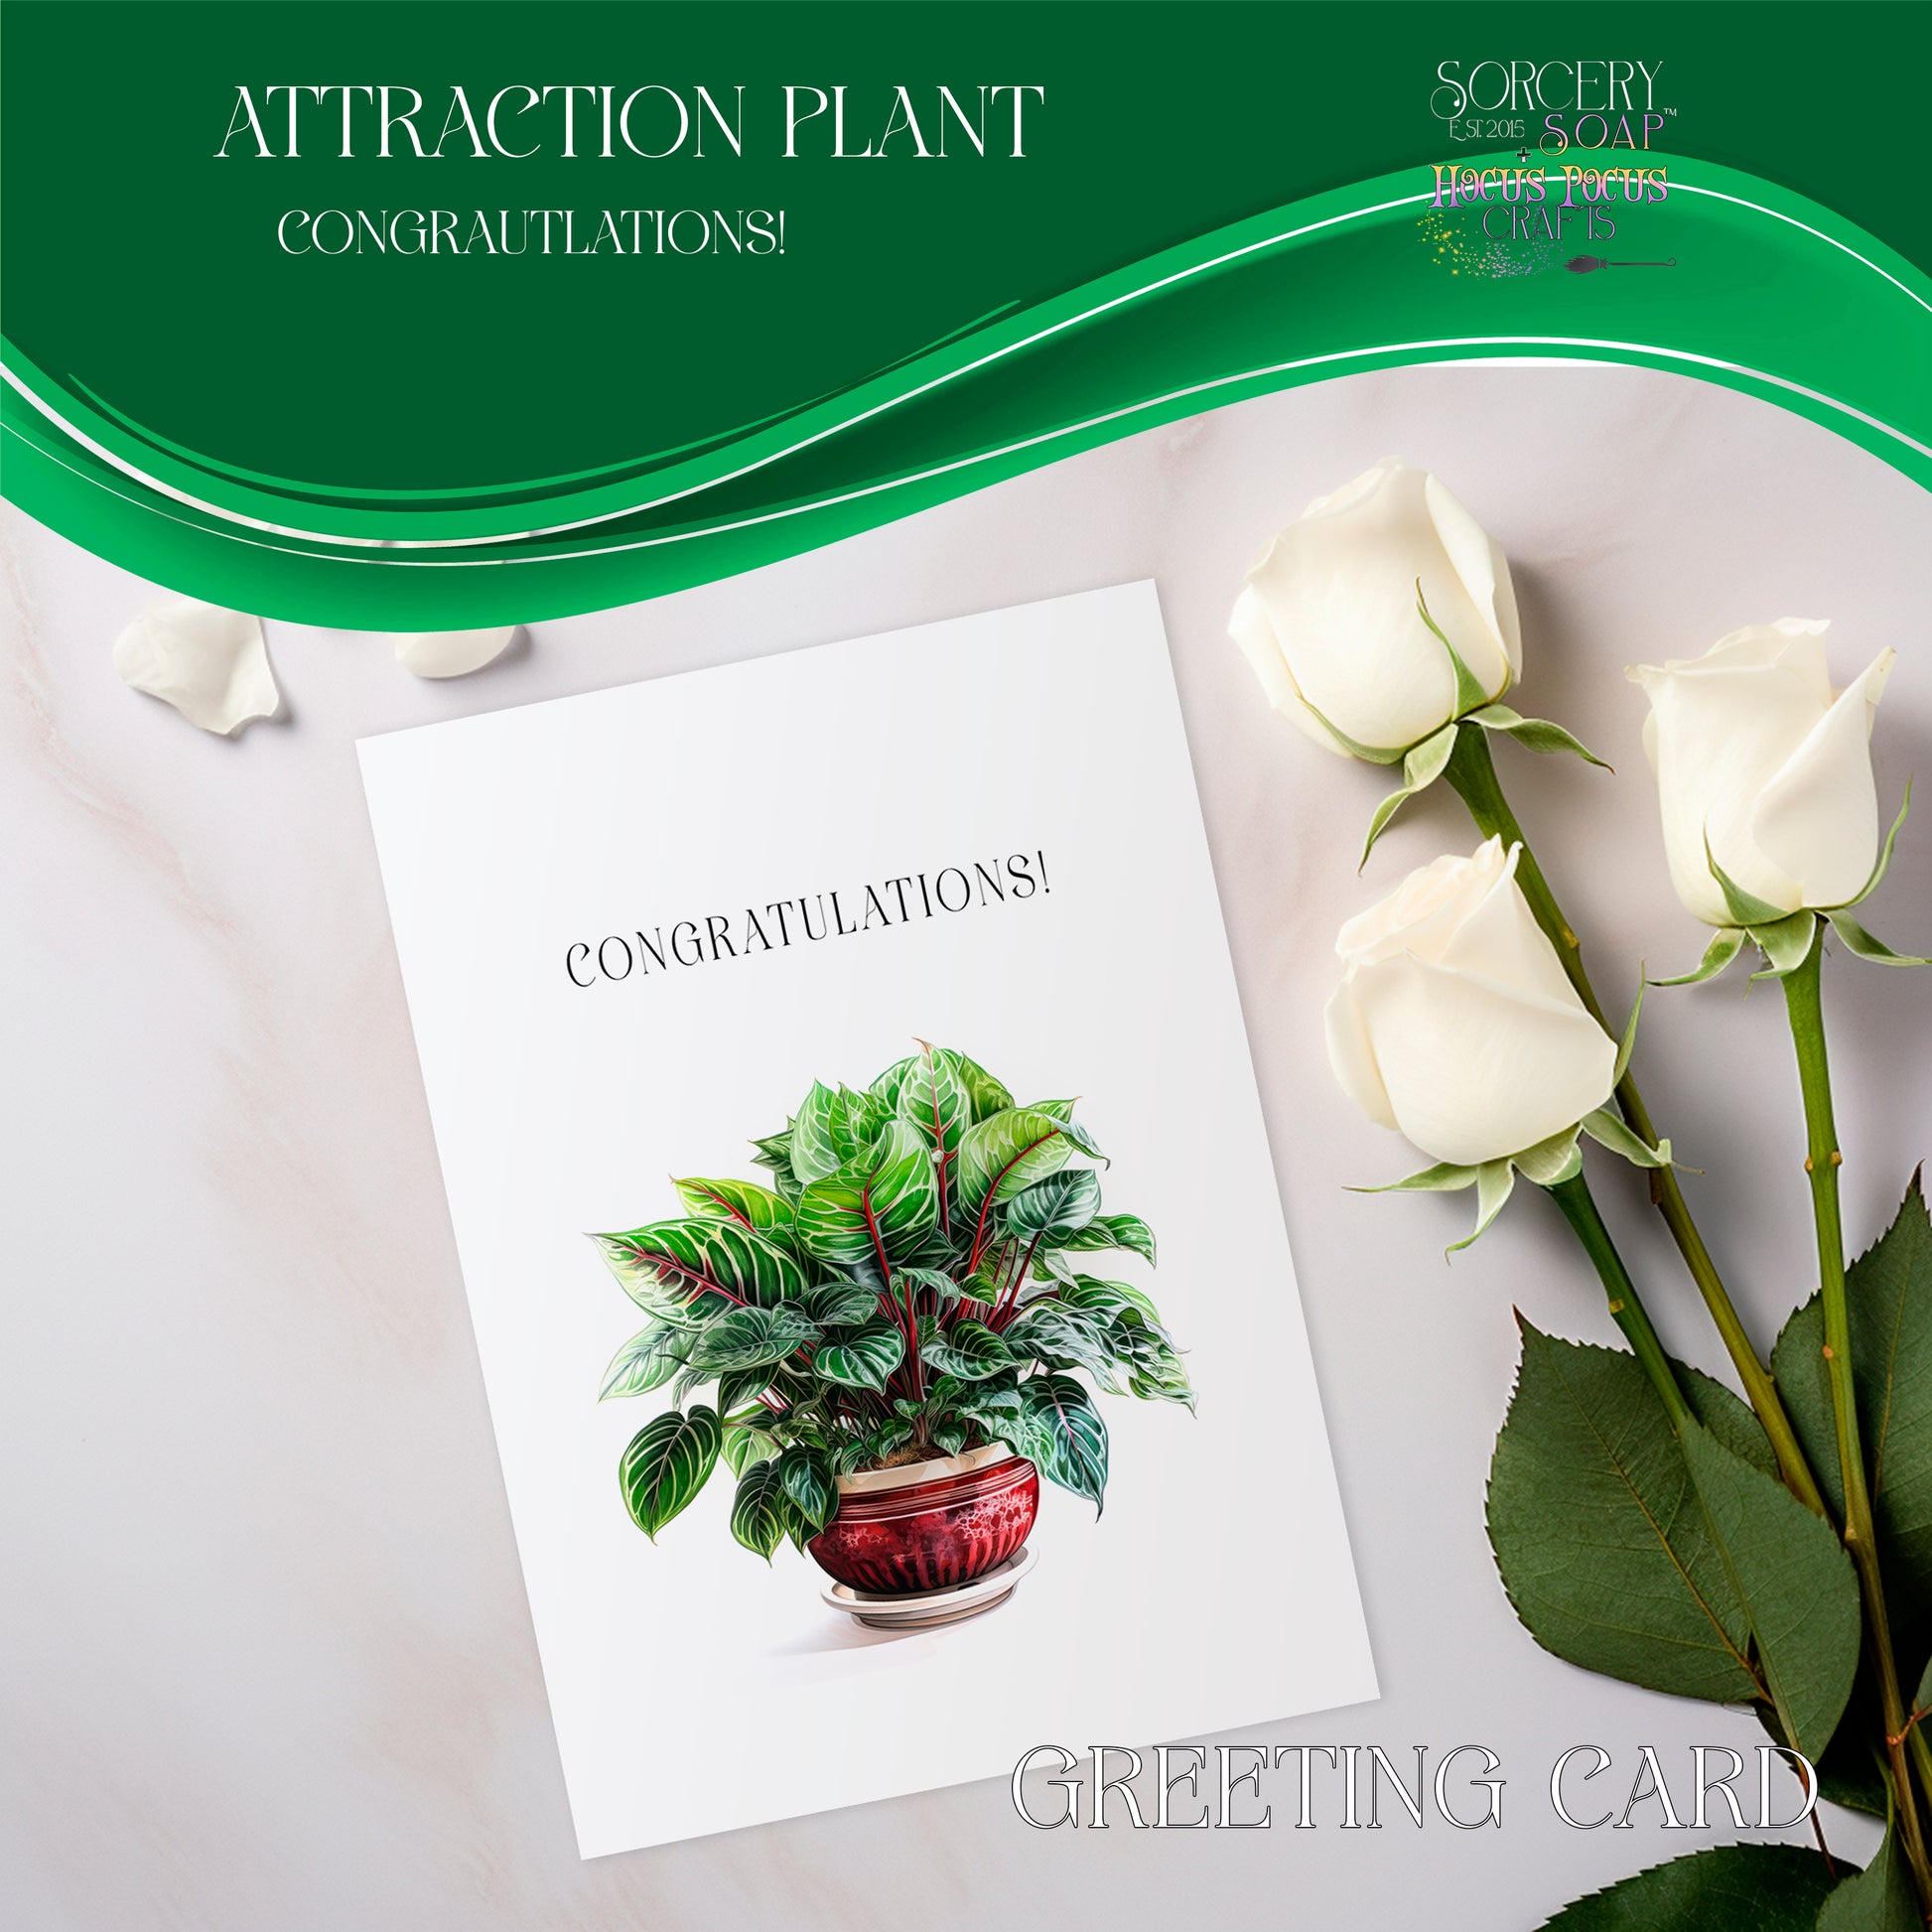 Attraction Plant Greeting Card